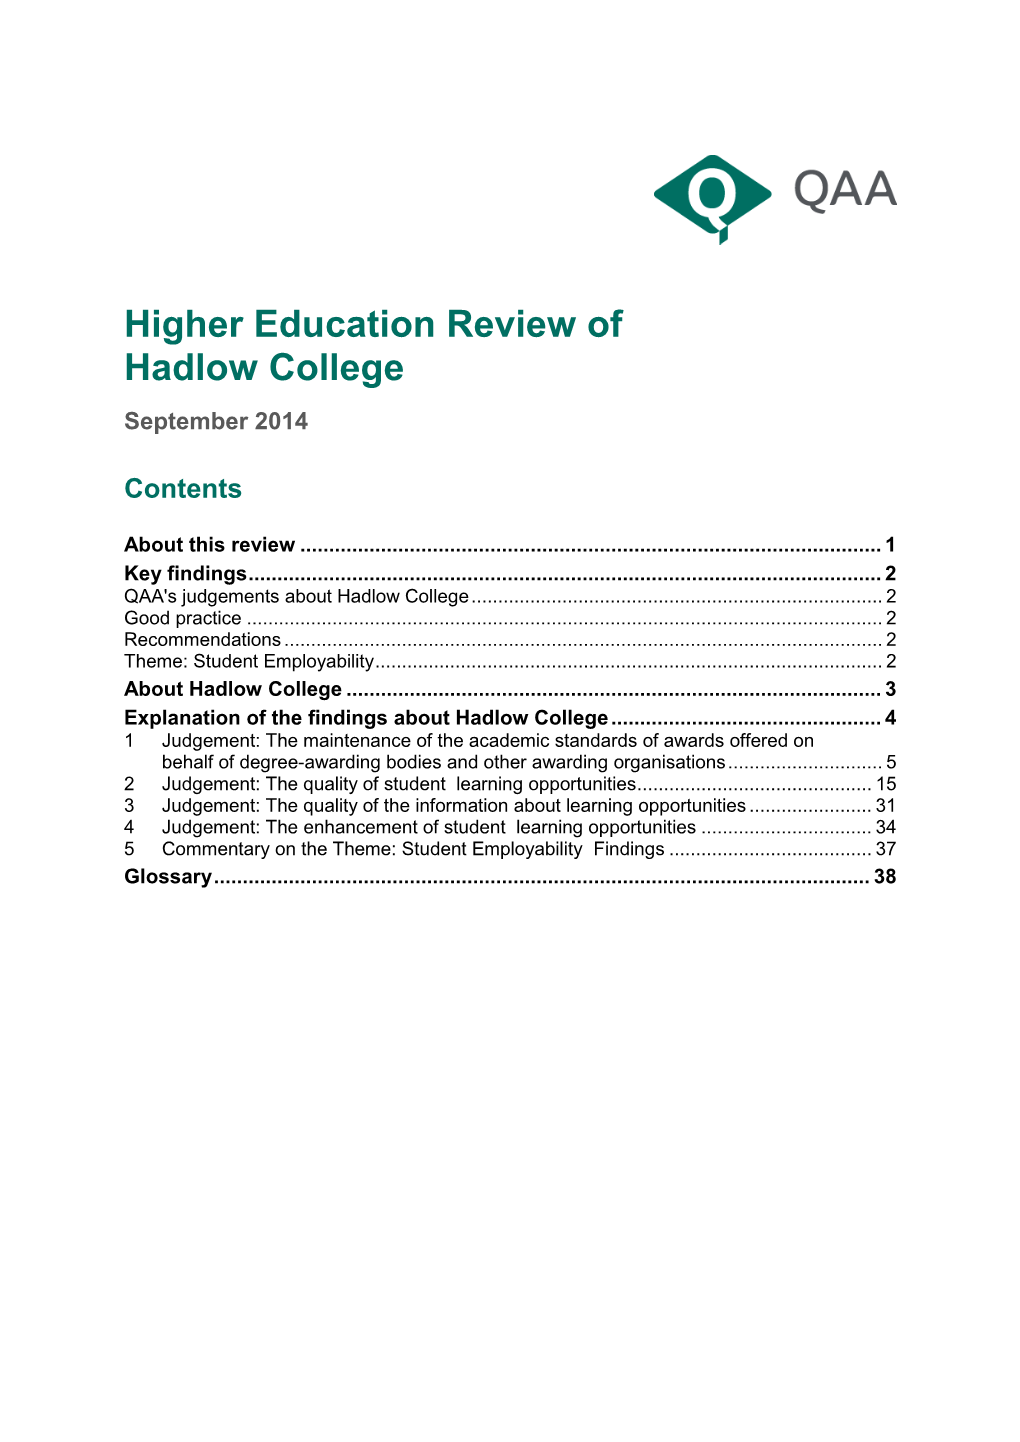 Higher Education Review of Hadlow College September 2014